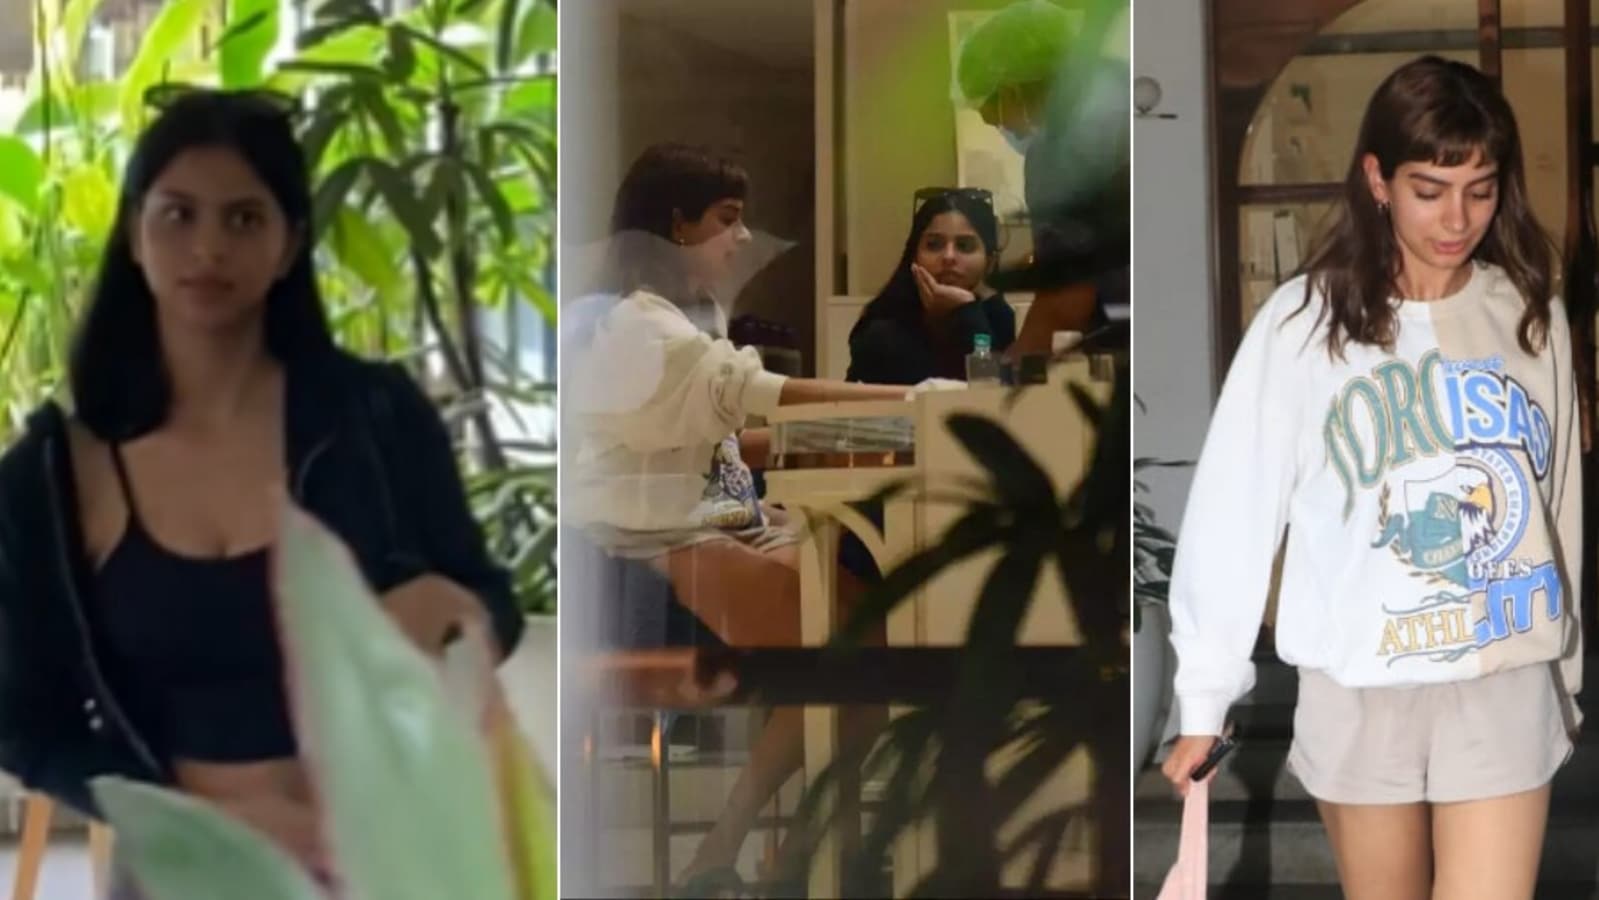 Suhana Khan, Khushi Kapoor get their nails done together, fans call them ‘Bollywood’s new BFFs’. Watch